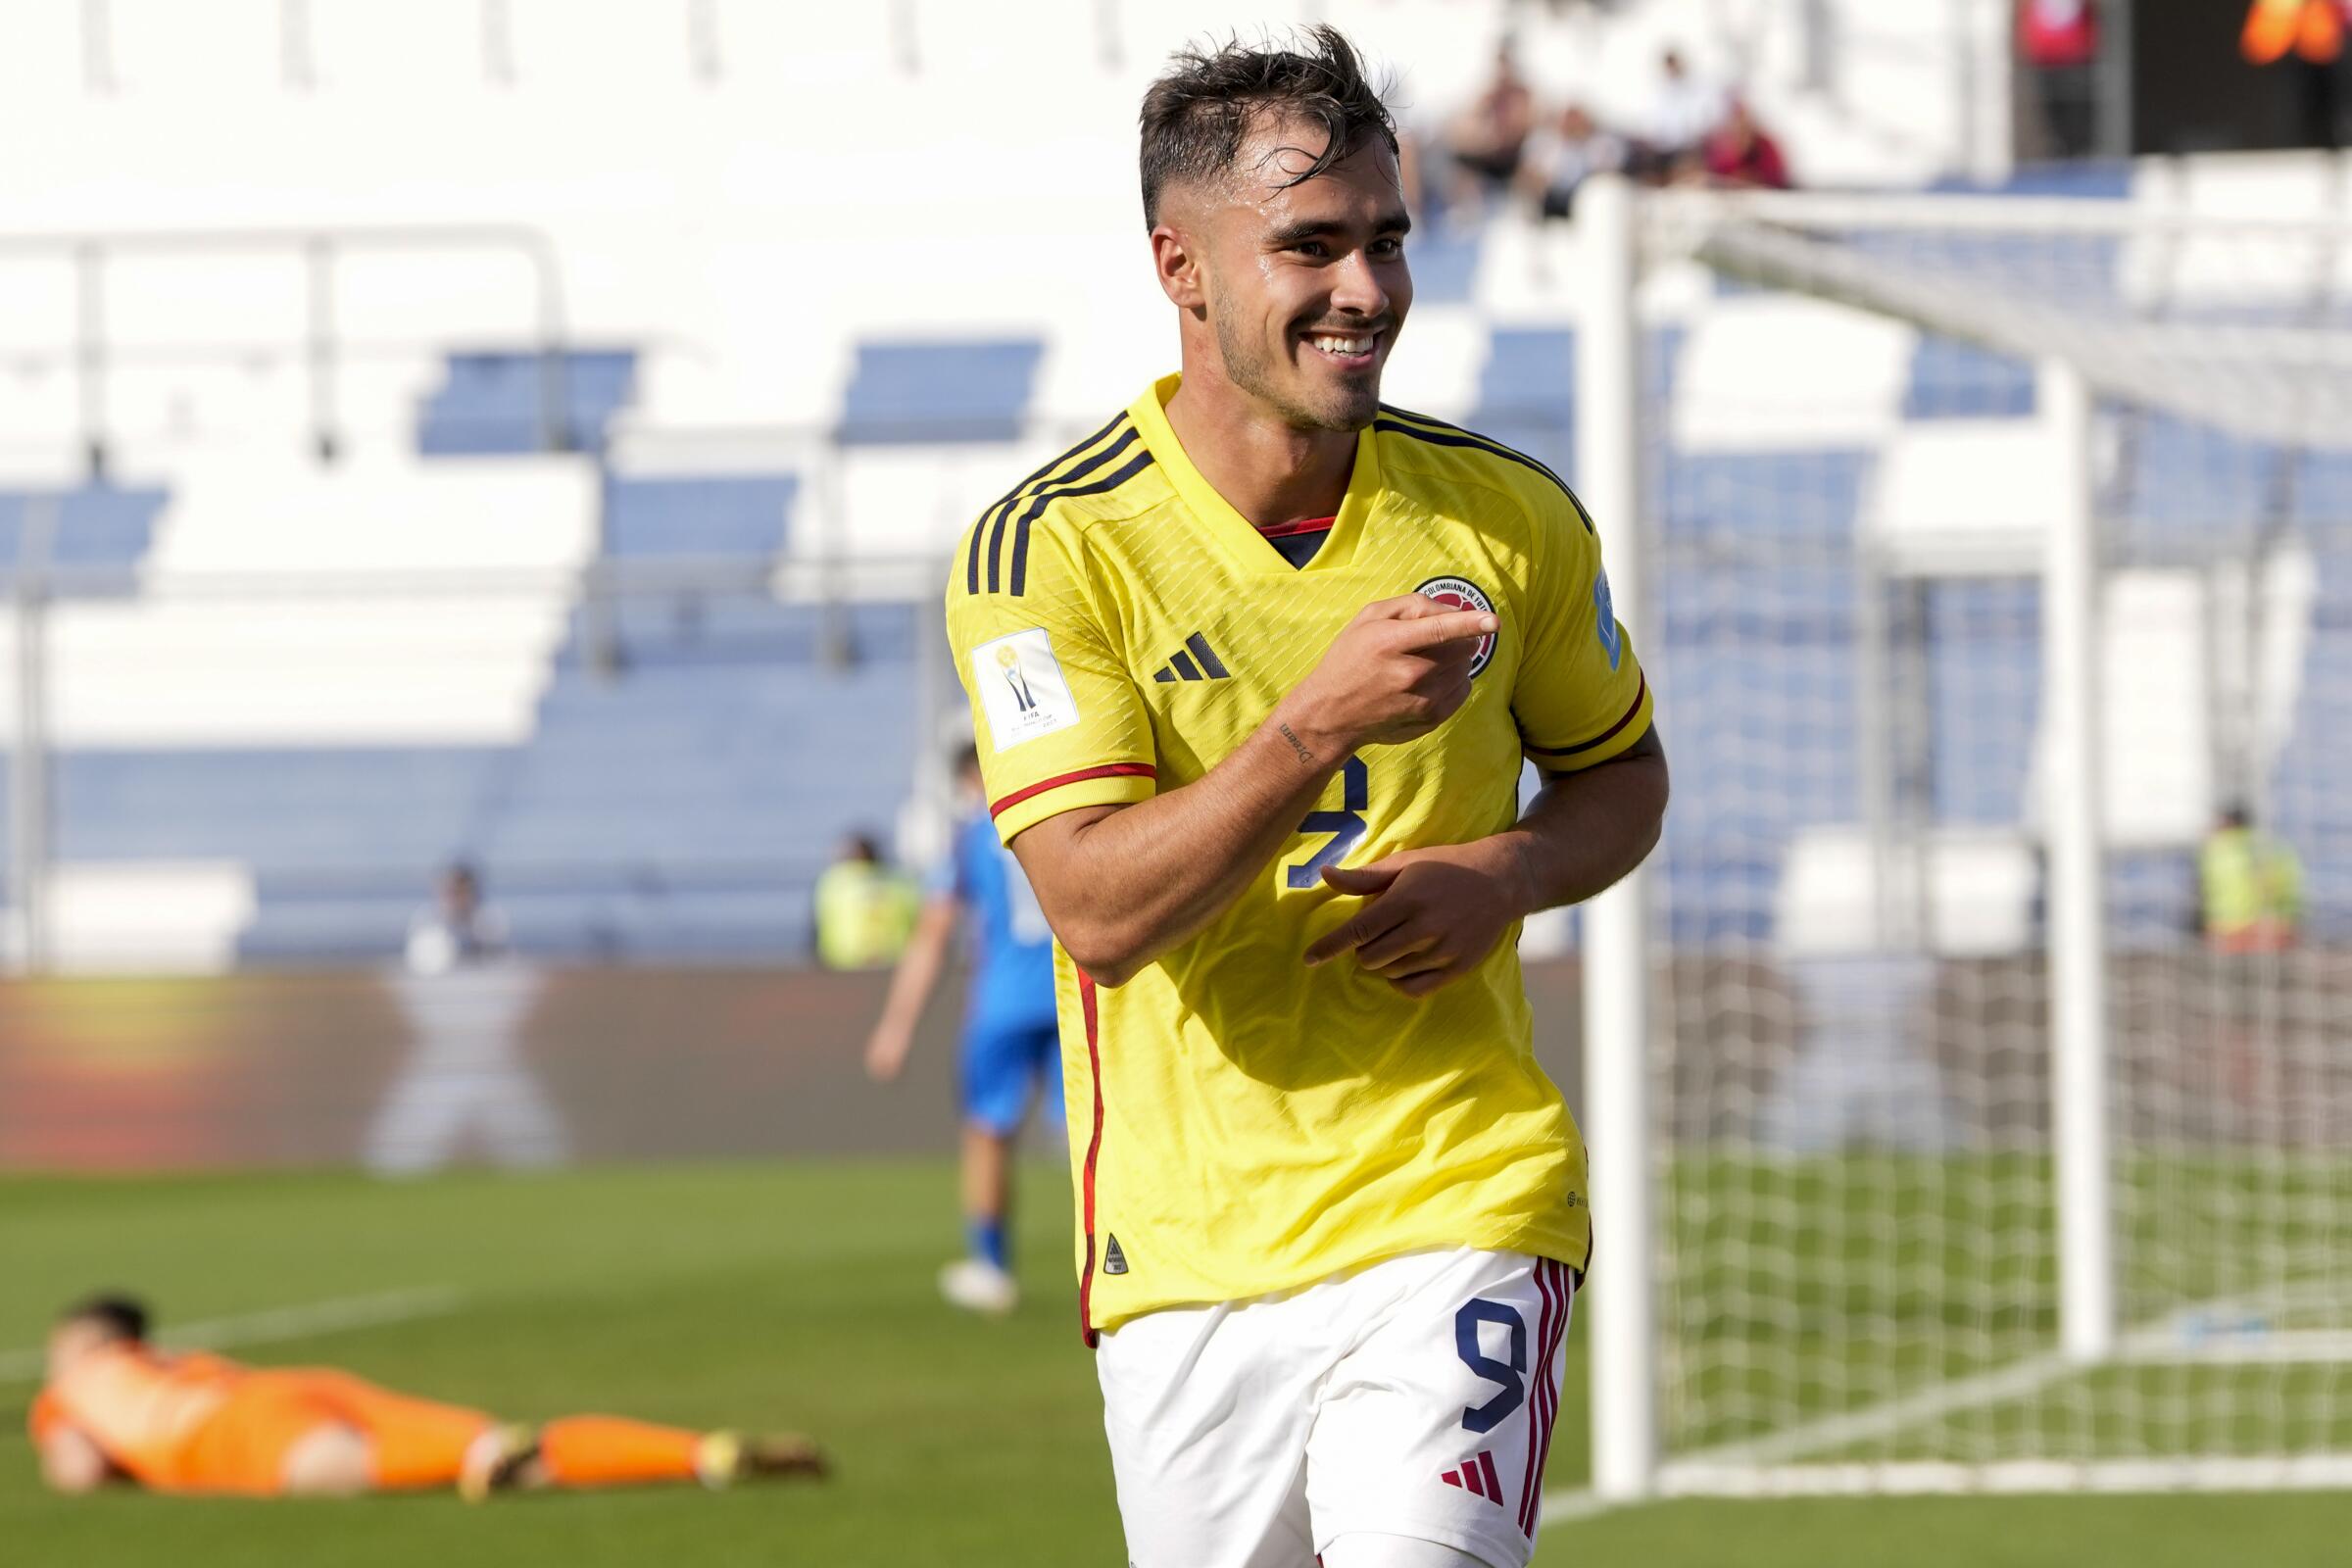 Tomás Ángel gestures after scoring for Colombia during a FIFA U-20 World Cup game against Slovakia.